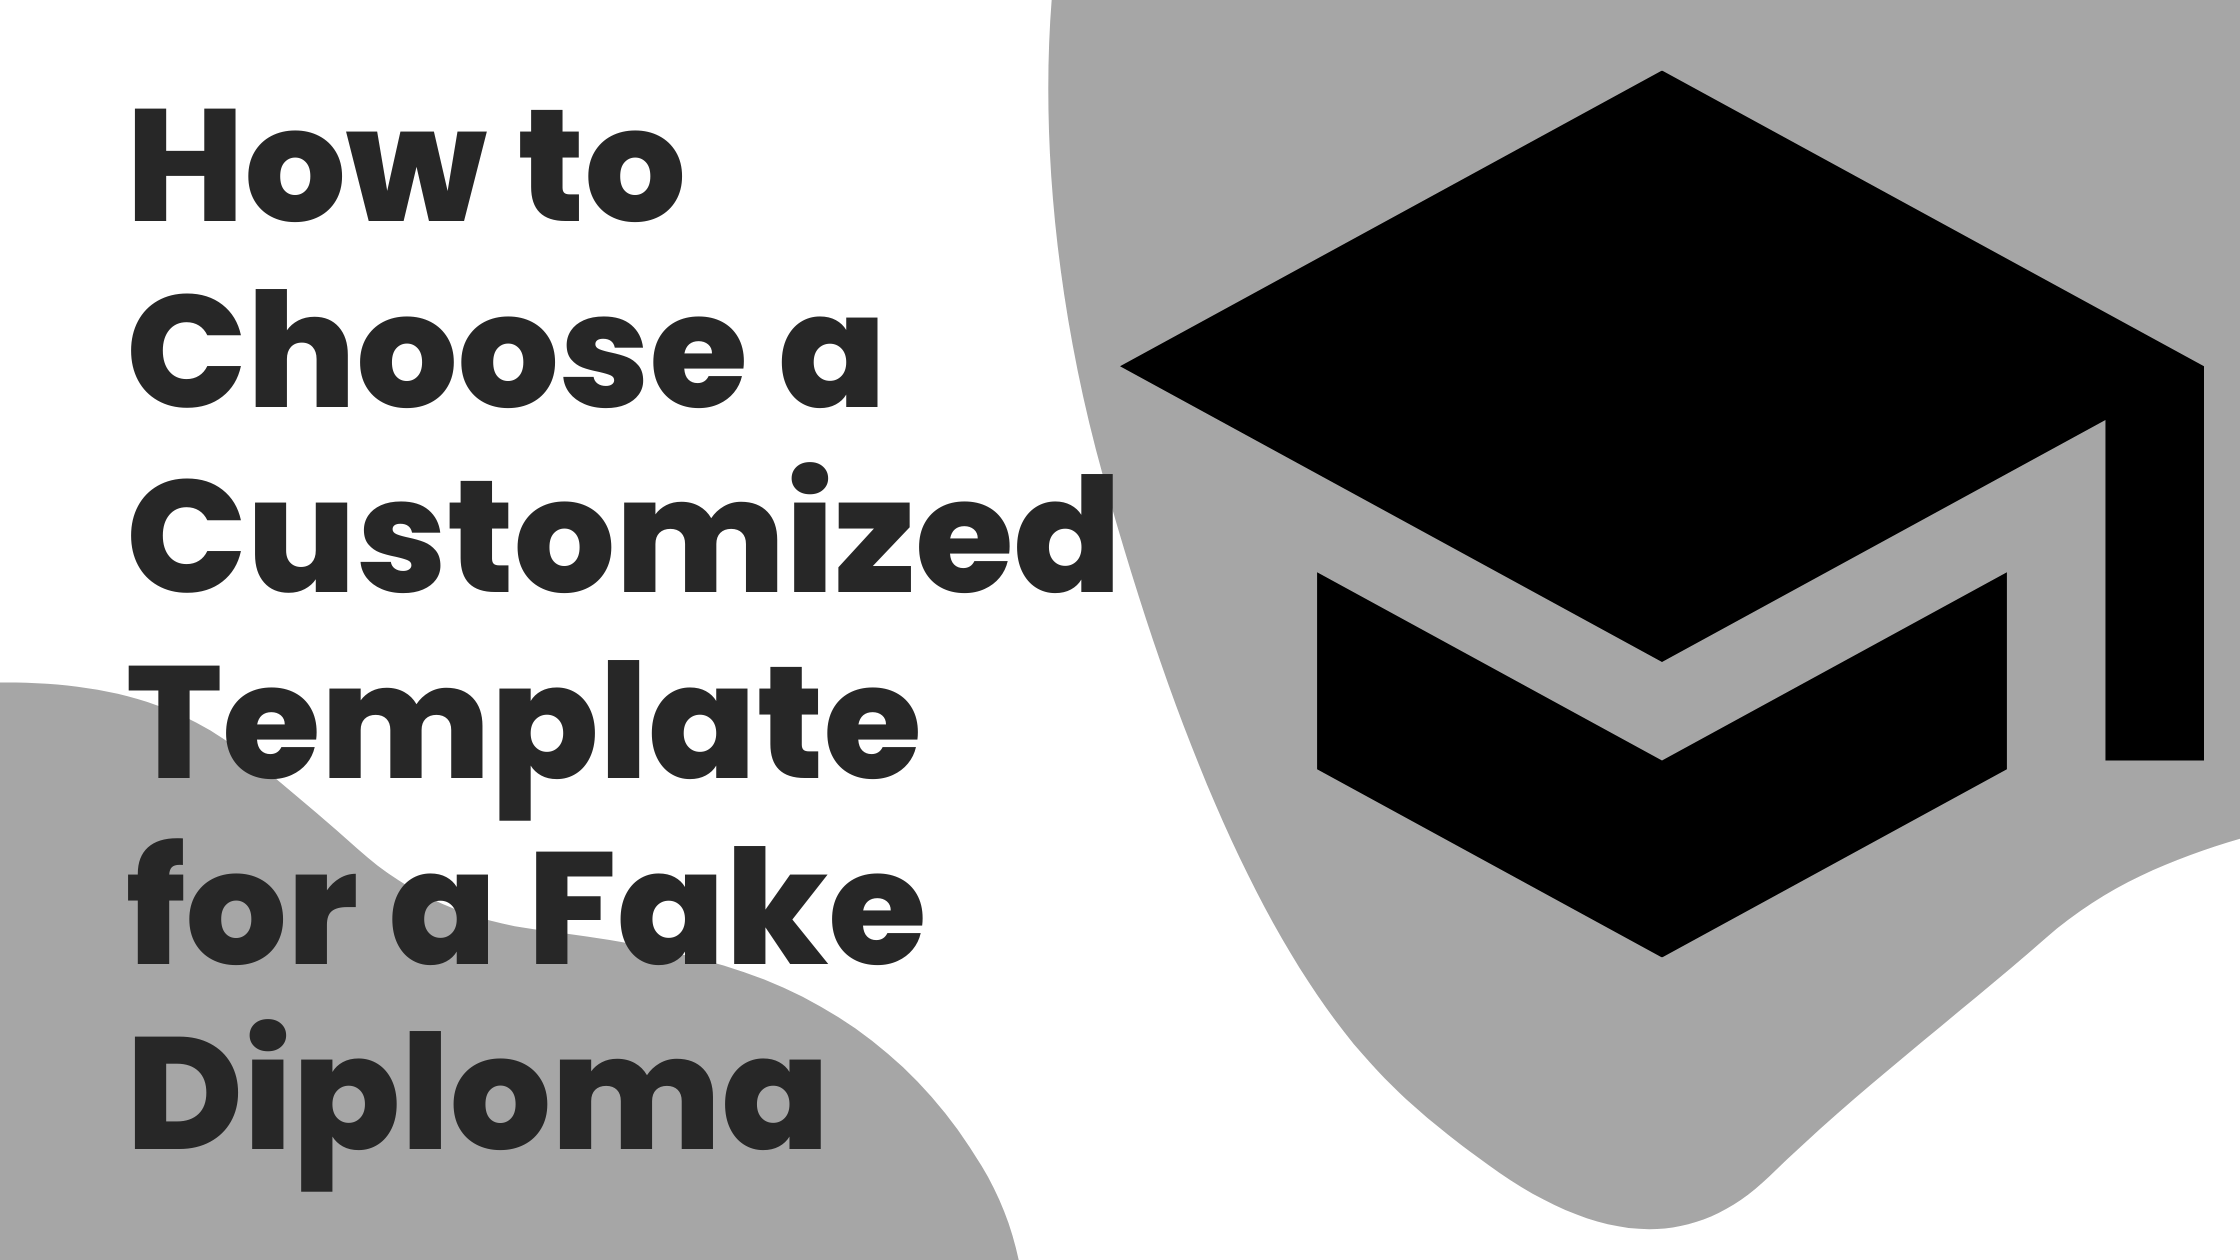 How to Choose a Customized Template for a Fake Diploma